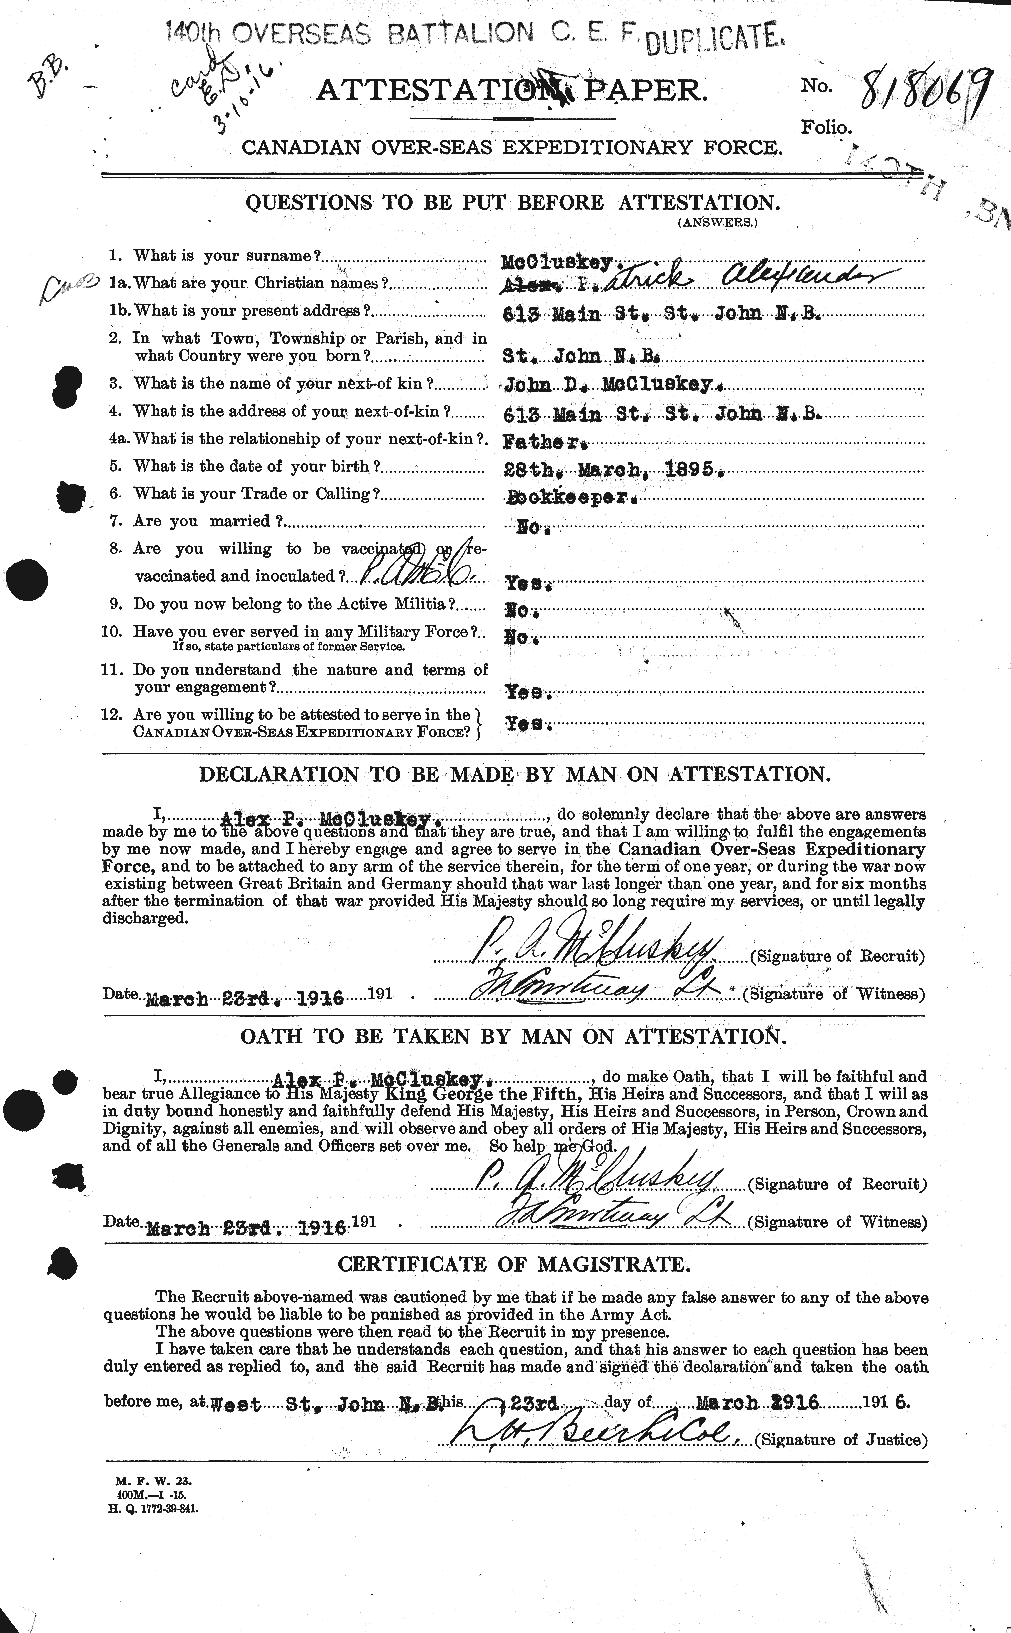 Personnel Records of the First World War - CEF 133475a